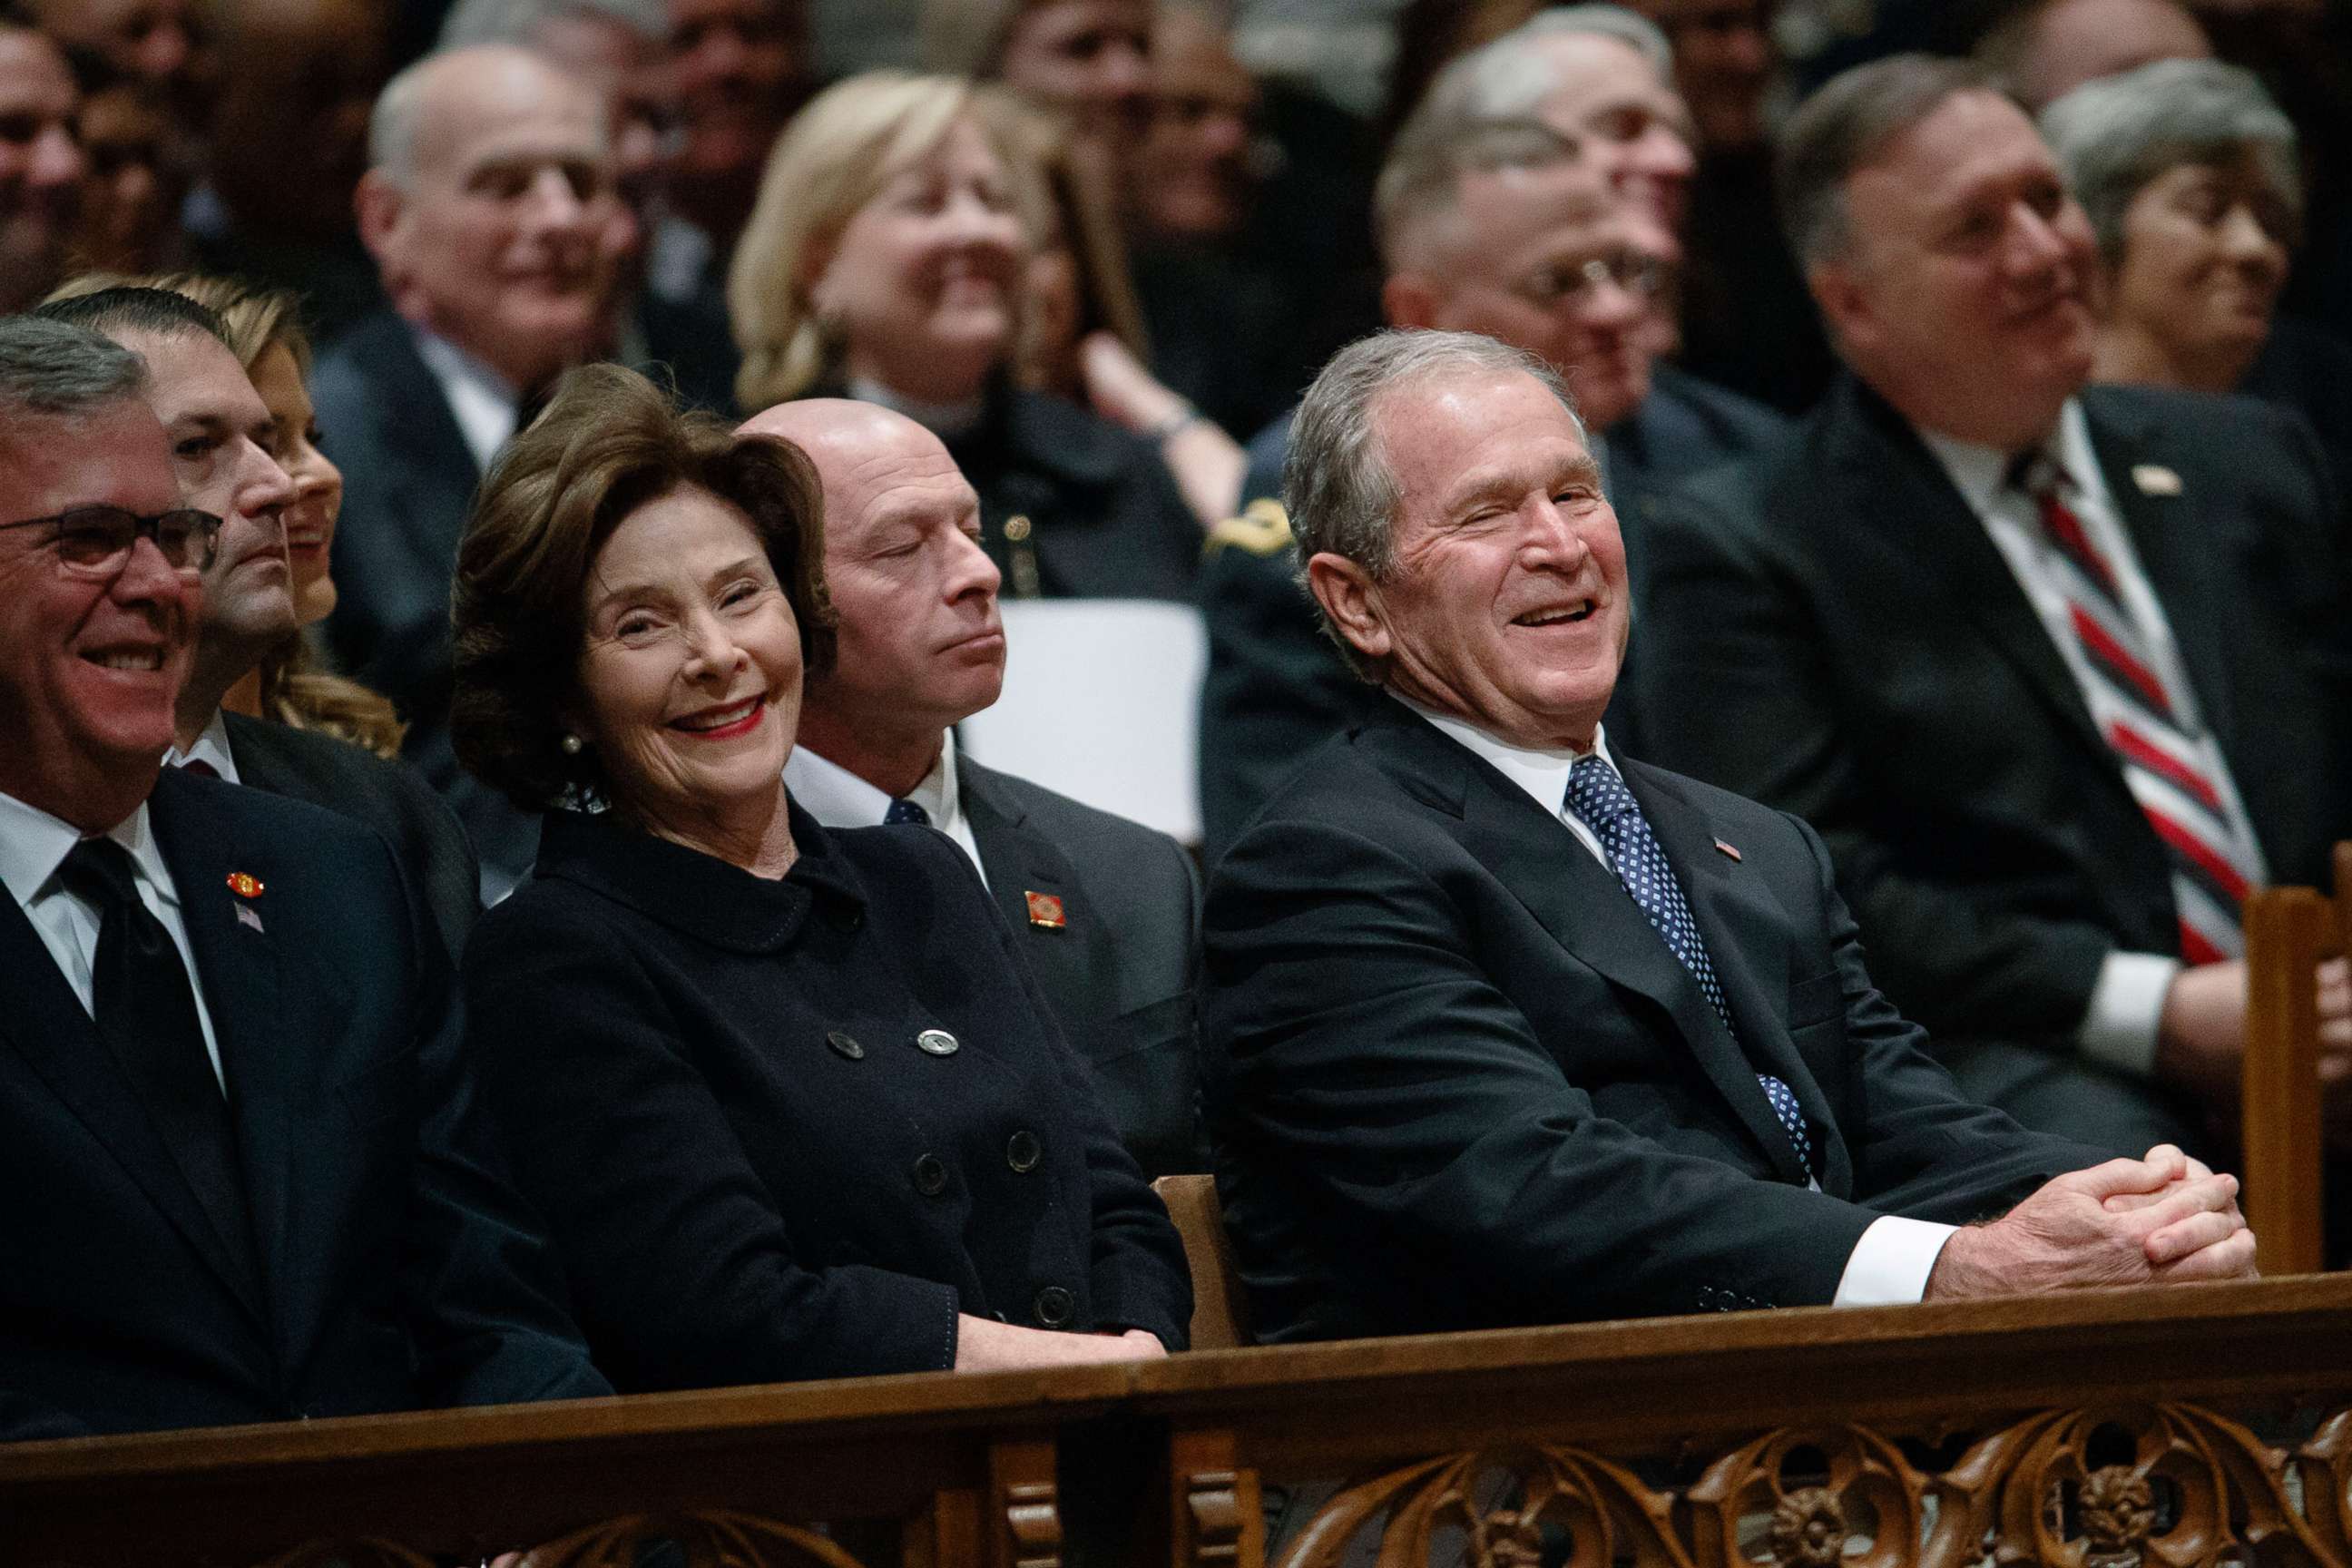 PHOTO: Jeb Bush, Laura Bush, and former President George W. Bush share a laugh as a story is told about former President George H.W. Bush during a State funeral at the National Cathedral, Dec. 5, 2018, in Washington.